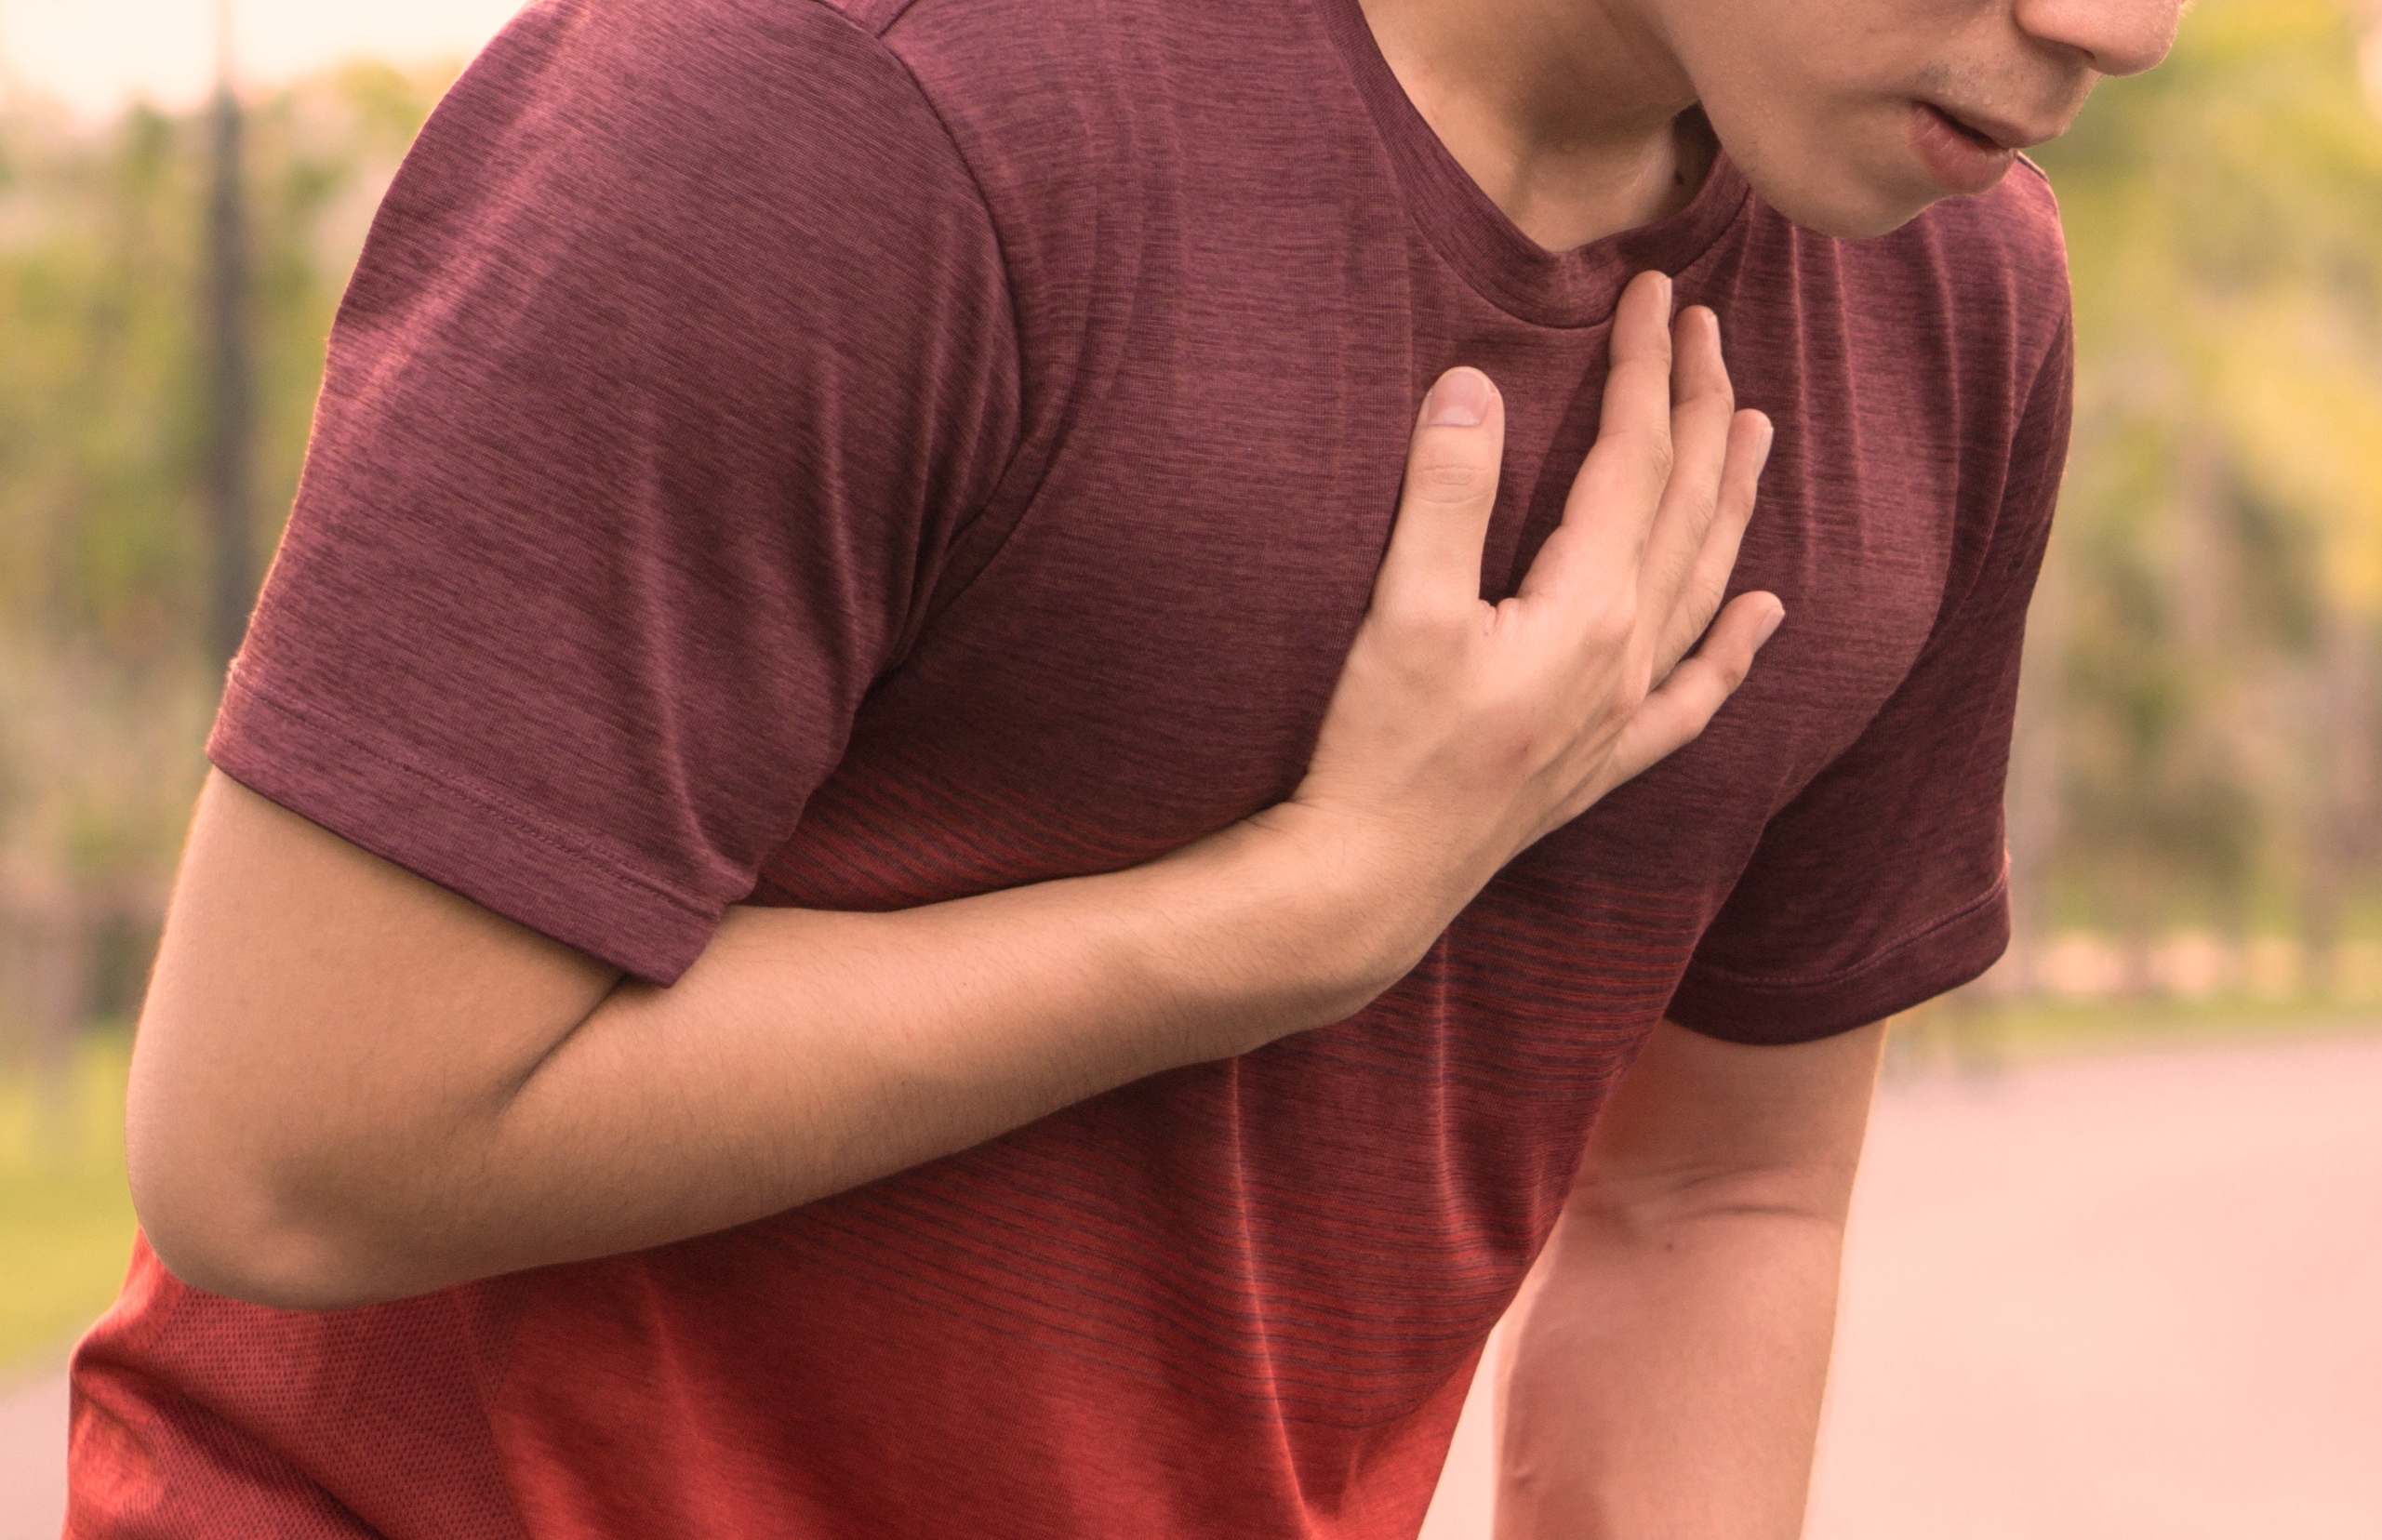 What to Expect in the ER if You Have Shortness of Breath